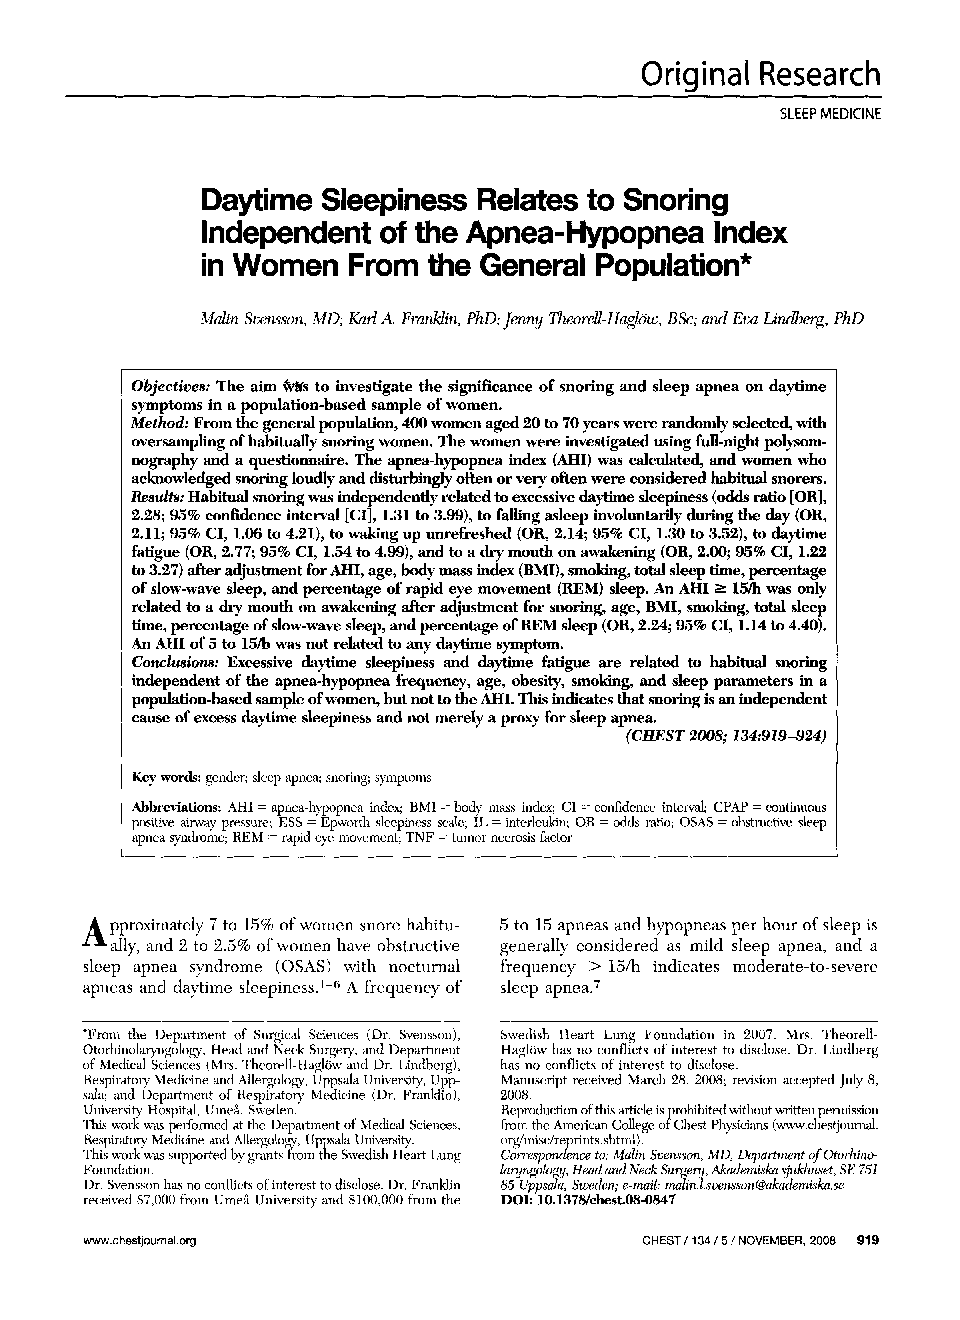 Daytime Sleepiness Relates to Snoring Independent of the Apnea-Hypopnea Index in Women From the General Population 